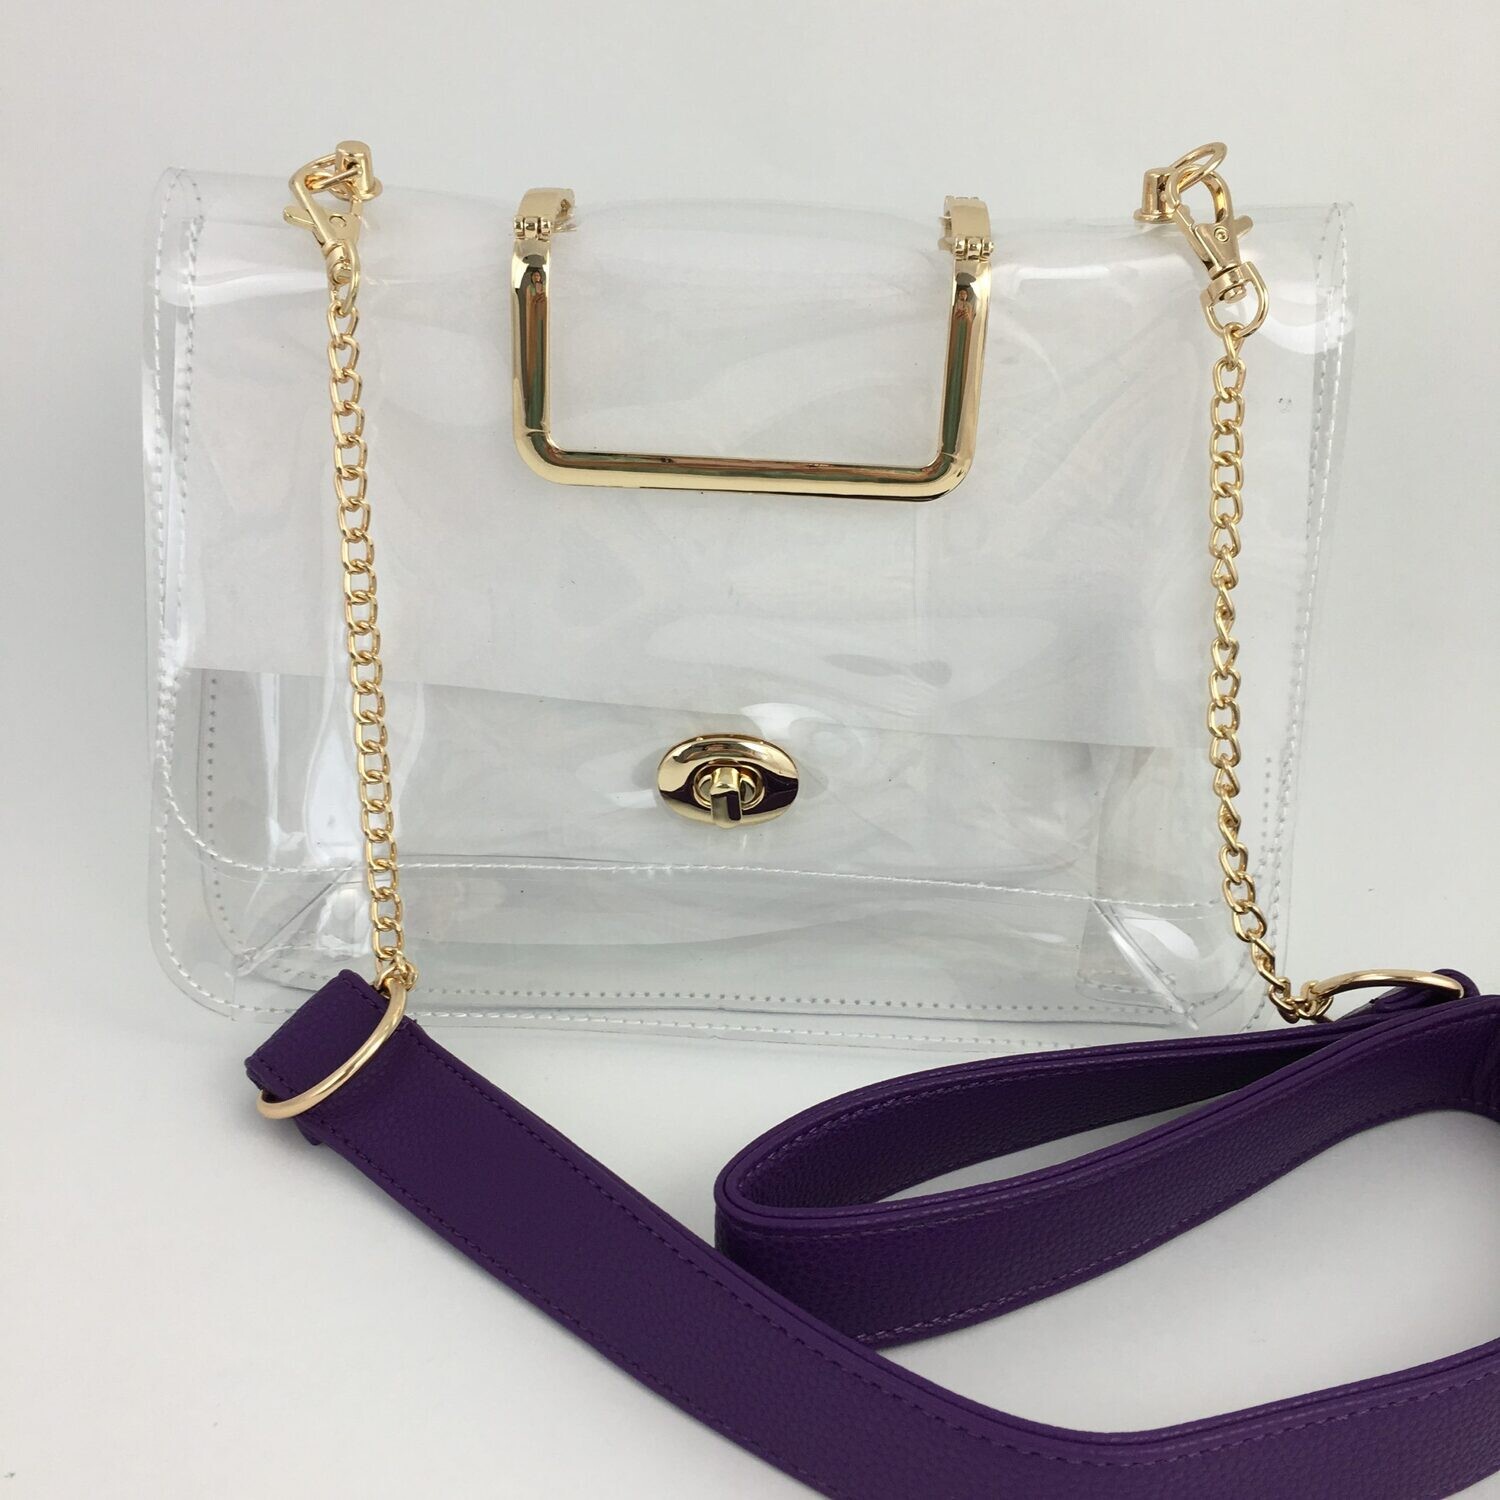 Clear Stadium Approved Handbag with Purple Strap